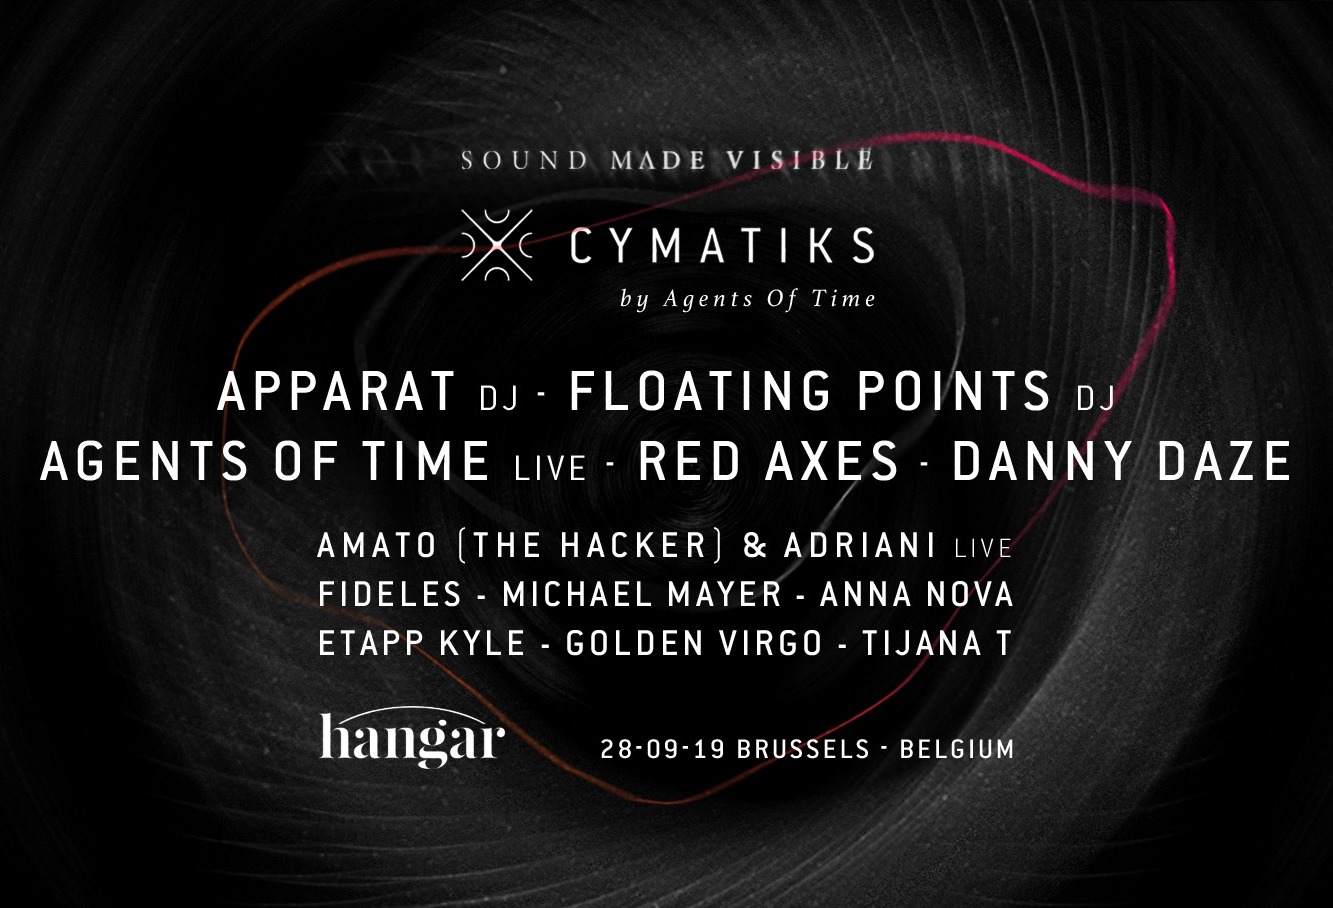 Agents Of Time team up with Brussels' Hangar for Cymatiks image